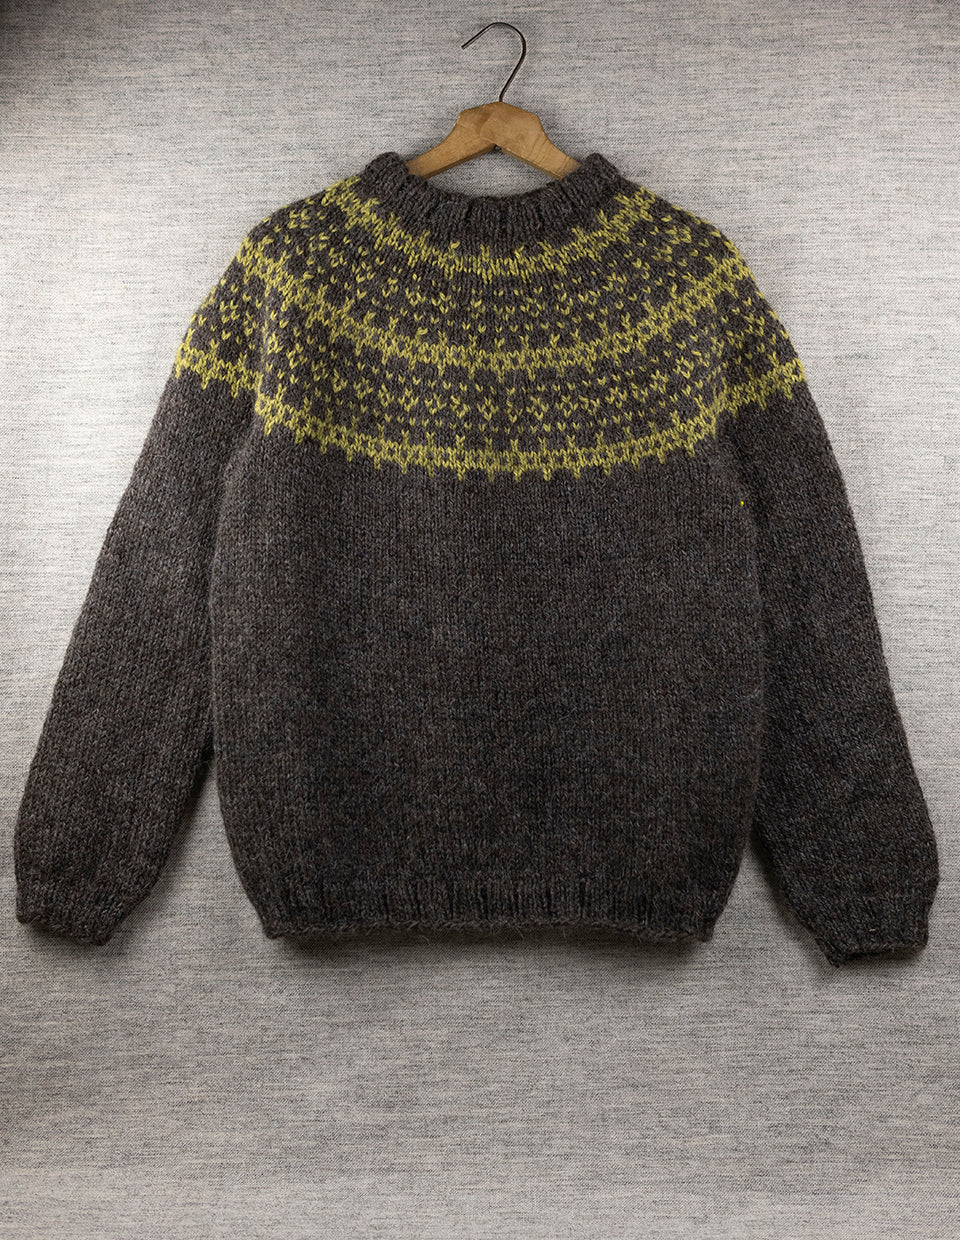 Salty Grain in Full storm, hand knitted sweater